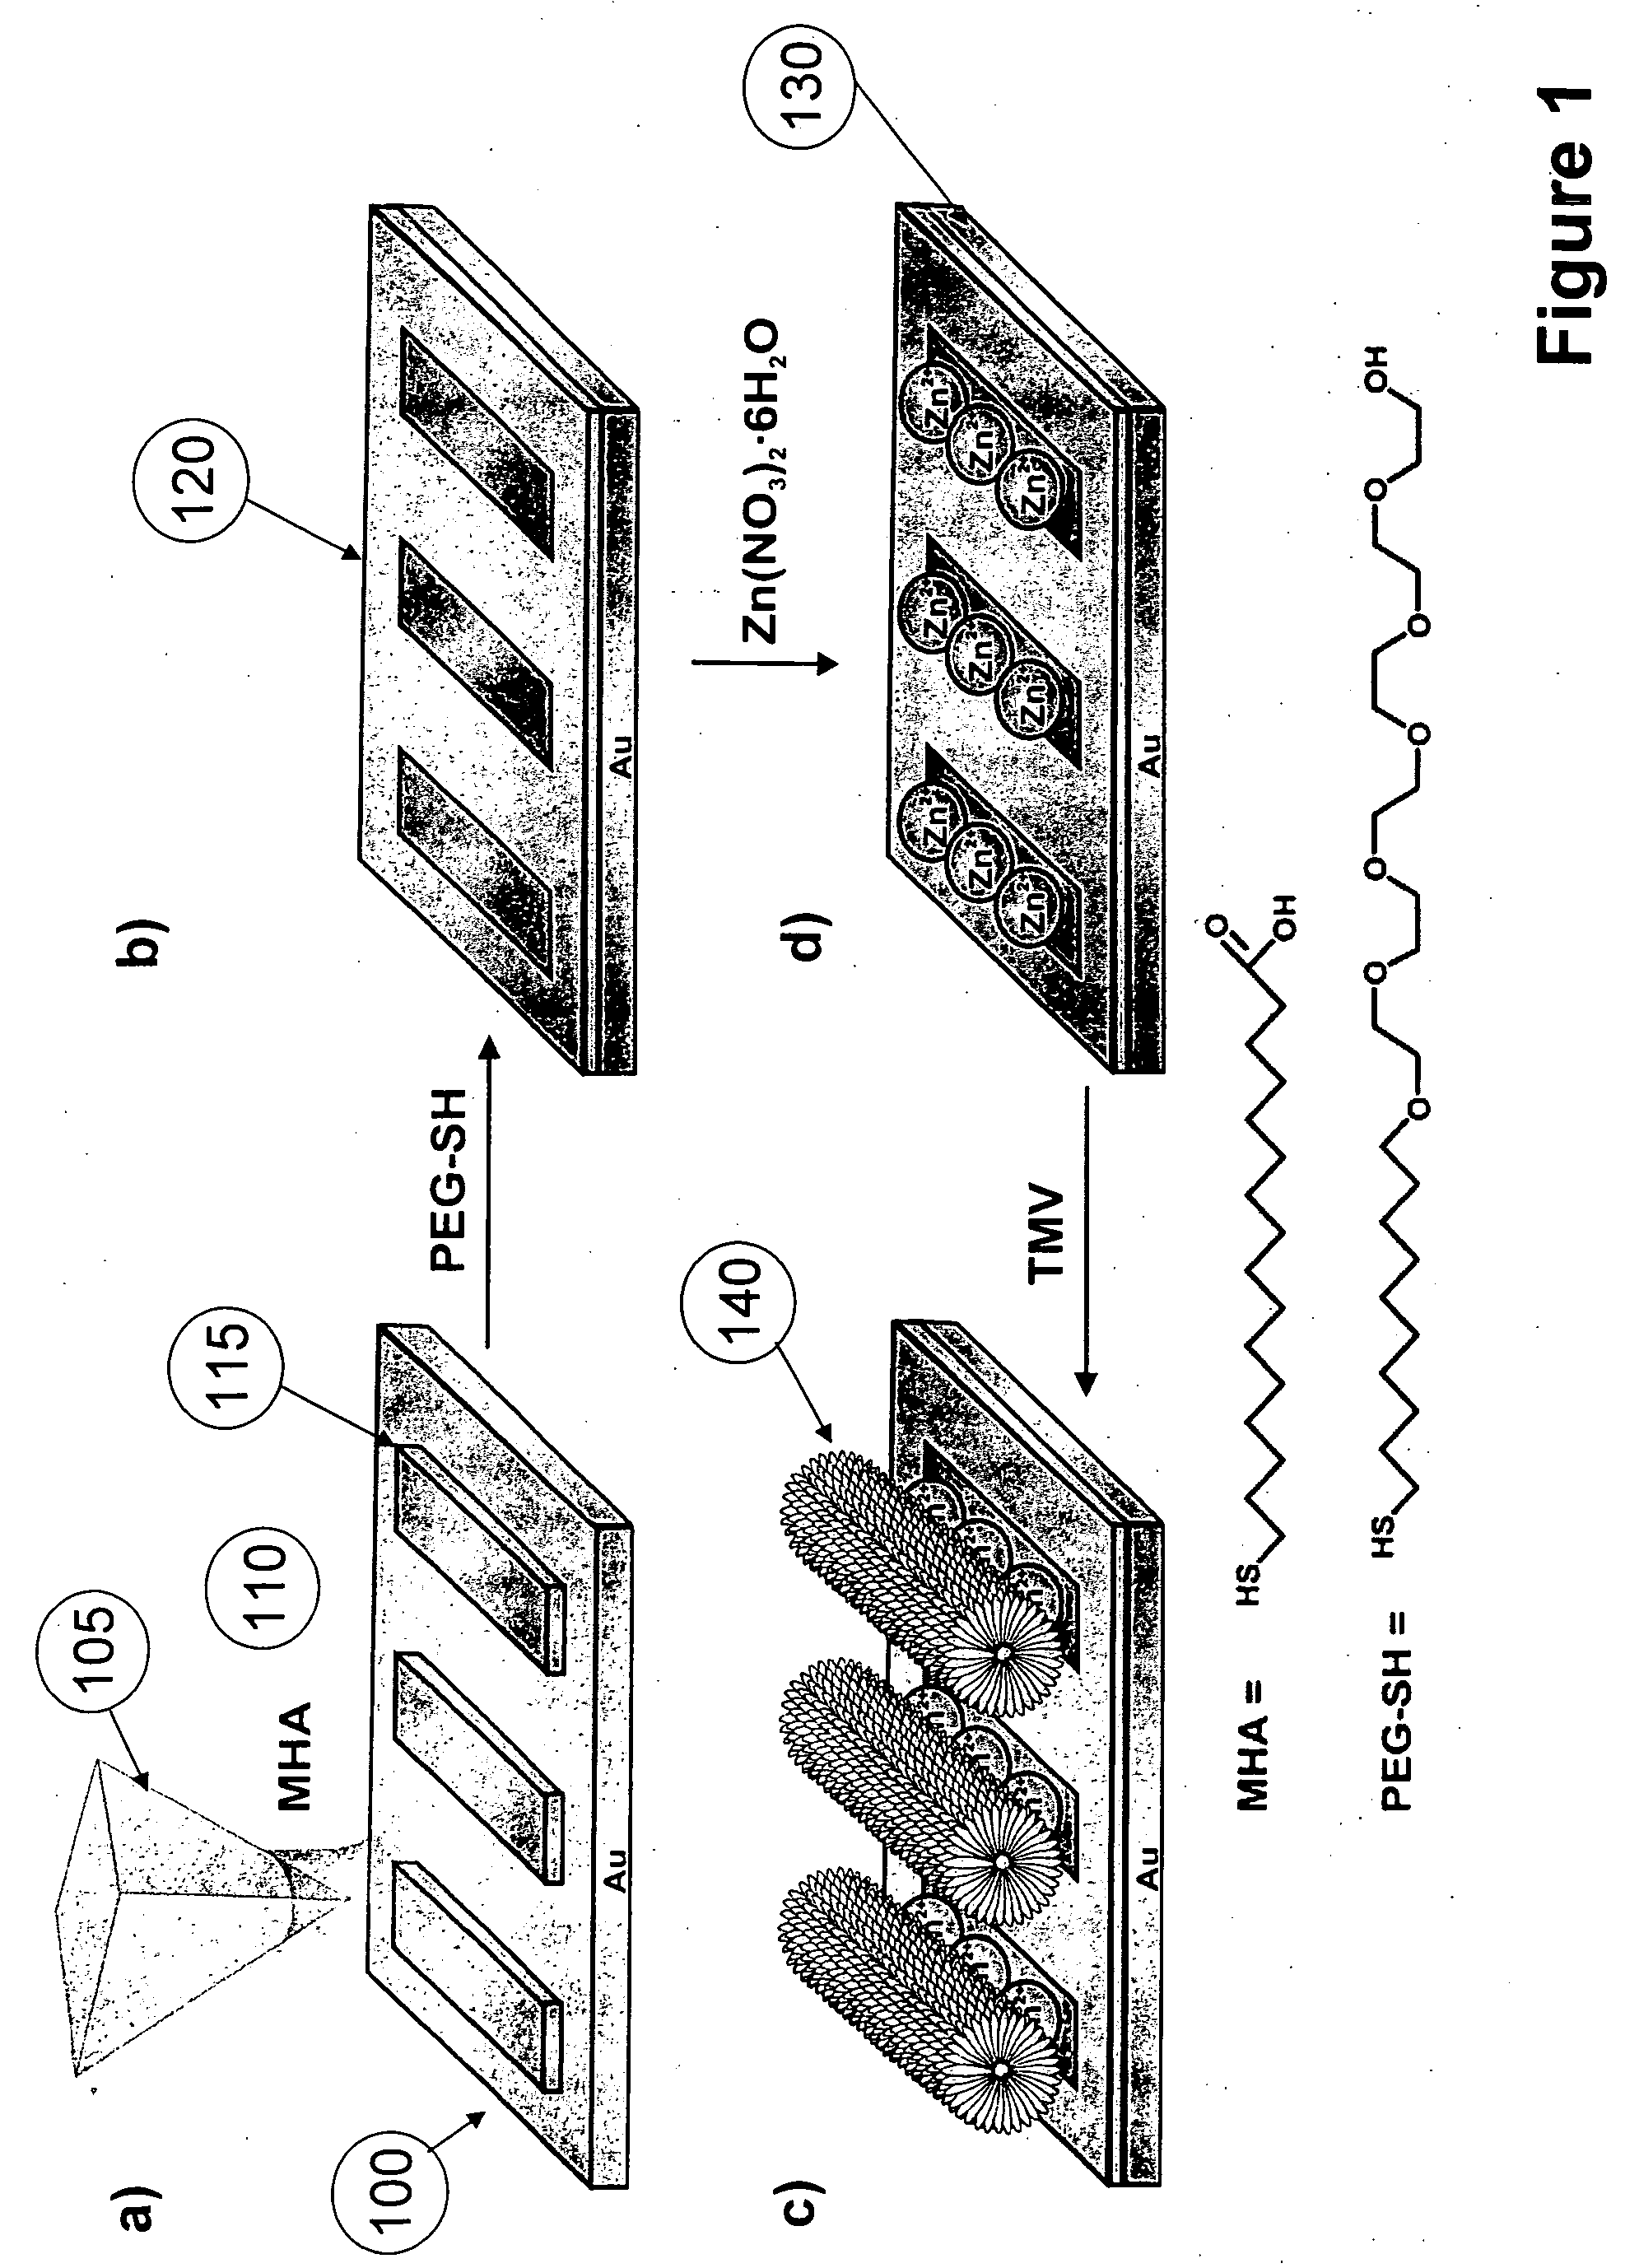 Nanoarrays of single virus particles, methods and instrumentation for the fabrication and use thereof